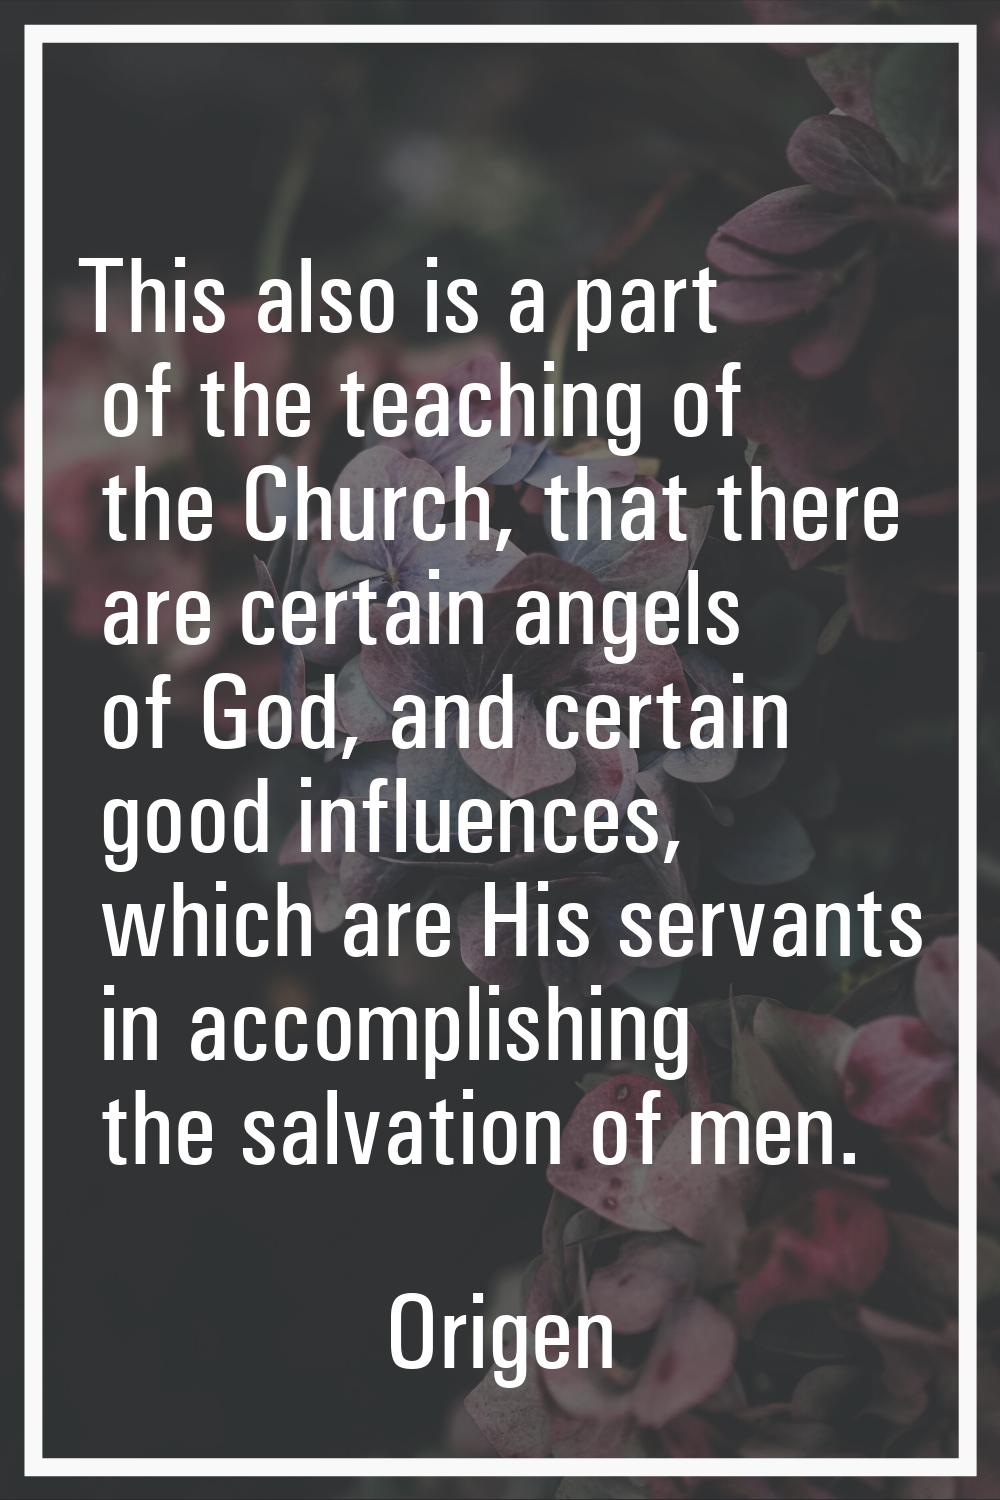 This also is a part of the teaching of the Church, that there are certain angels of God, and certai